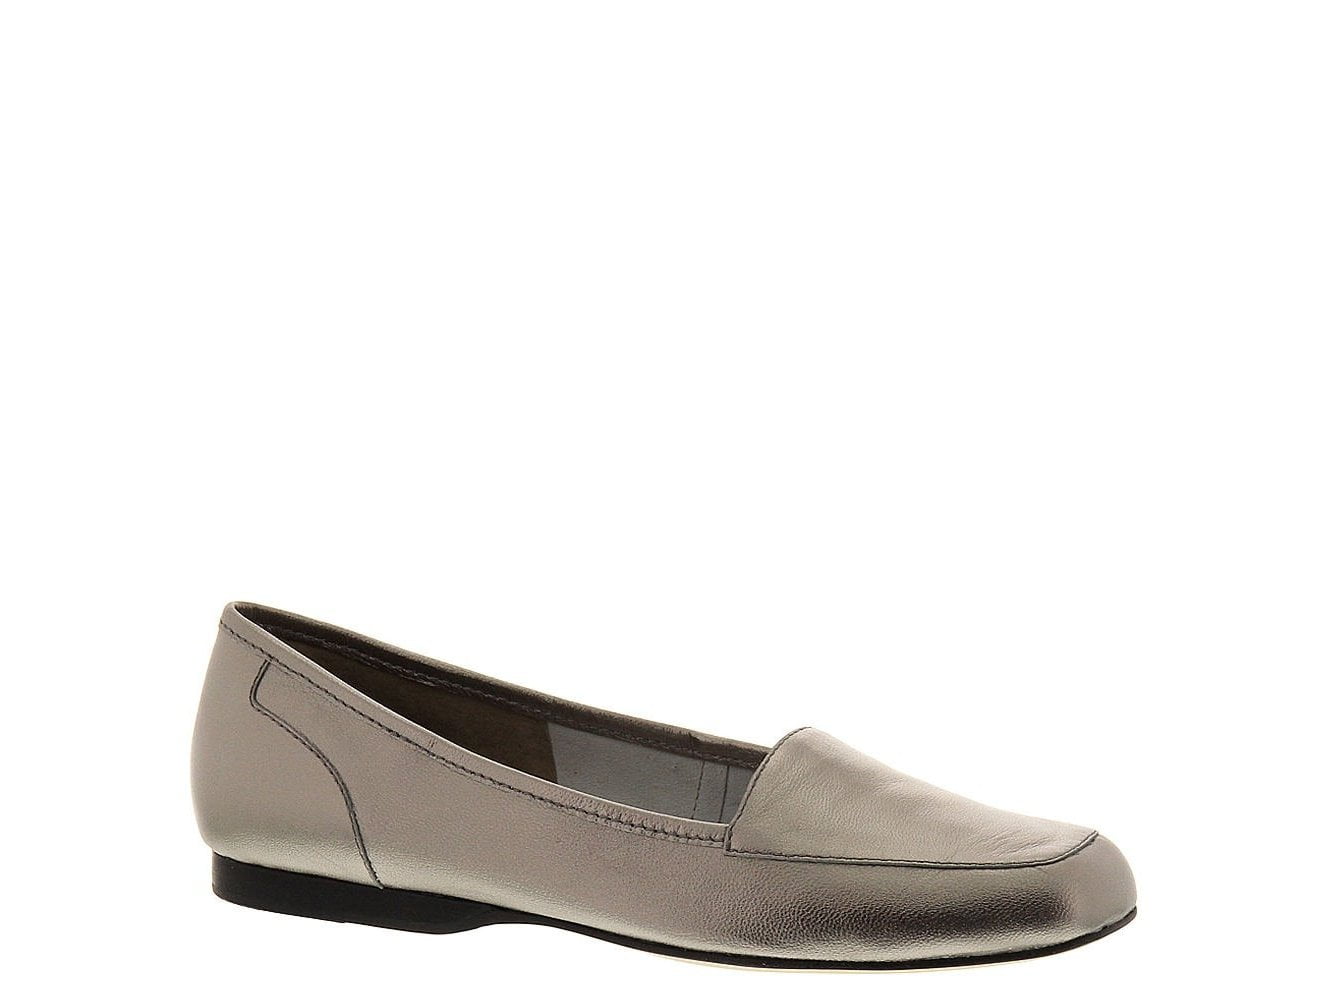 ARRAY - ARRAY Womens Freedom Leather Square Toe Loafers, Pewter, Size 8 ...